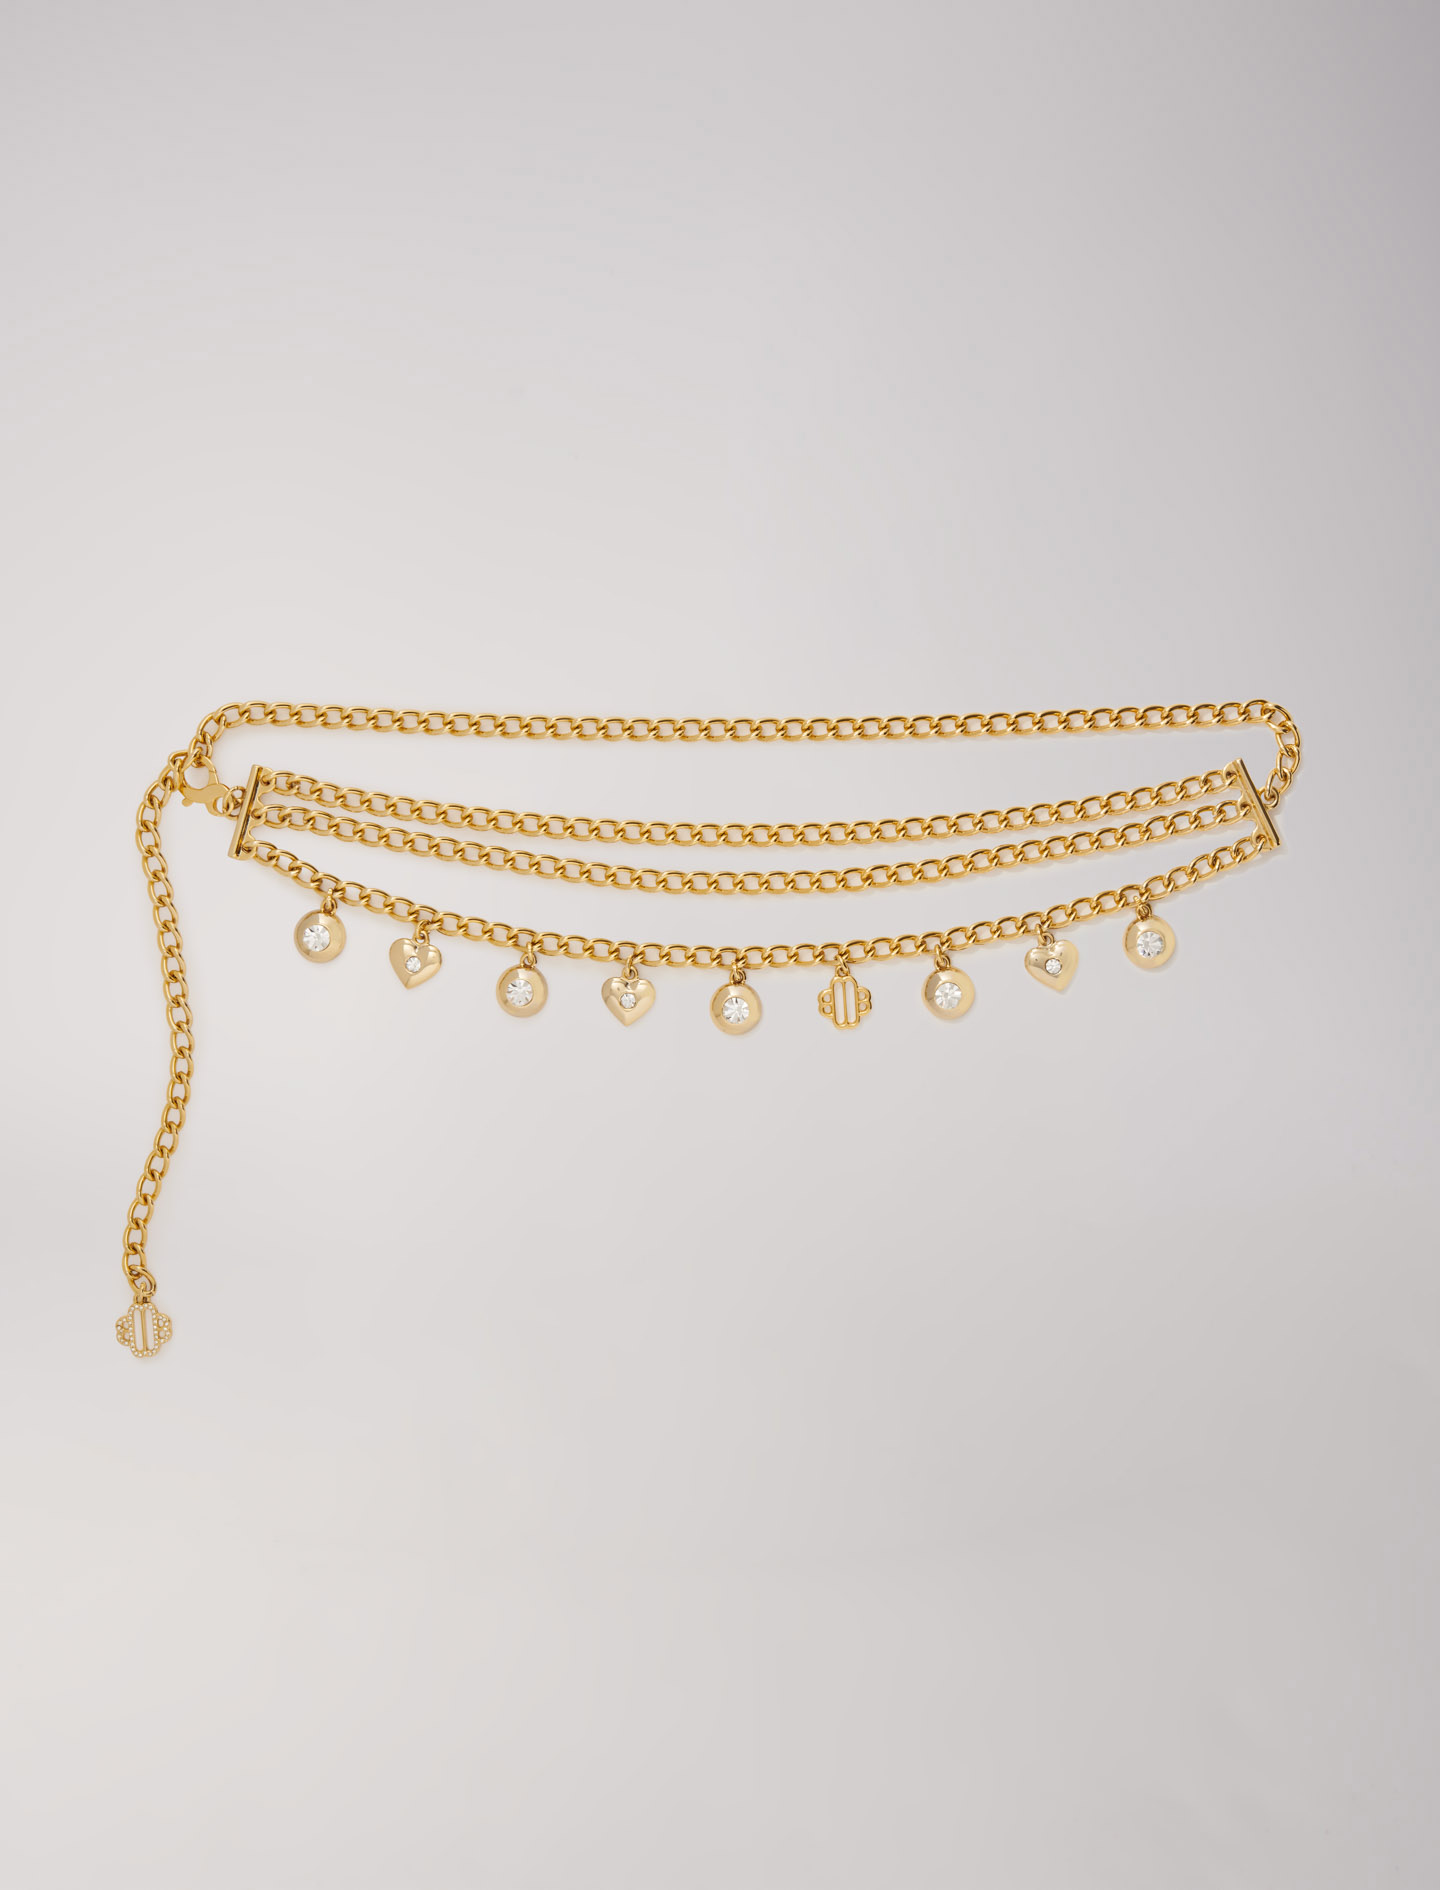 Mixte's glass Accessories: Jewellery chain belt for Fall/Winter, size Mixte-Belts-US S / FR 1, in color Gold / Yellow